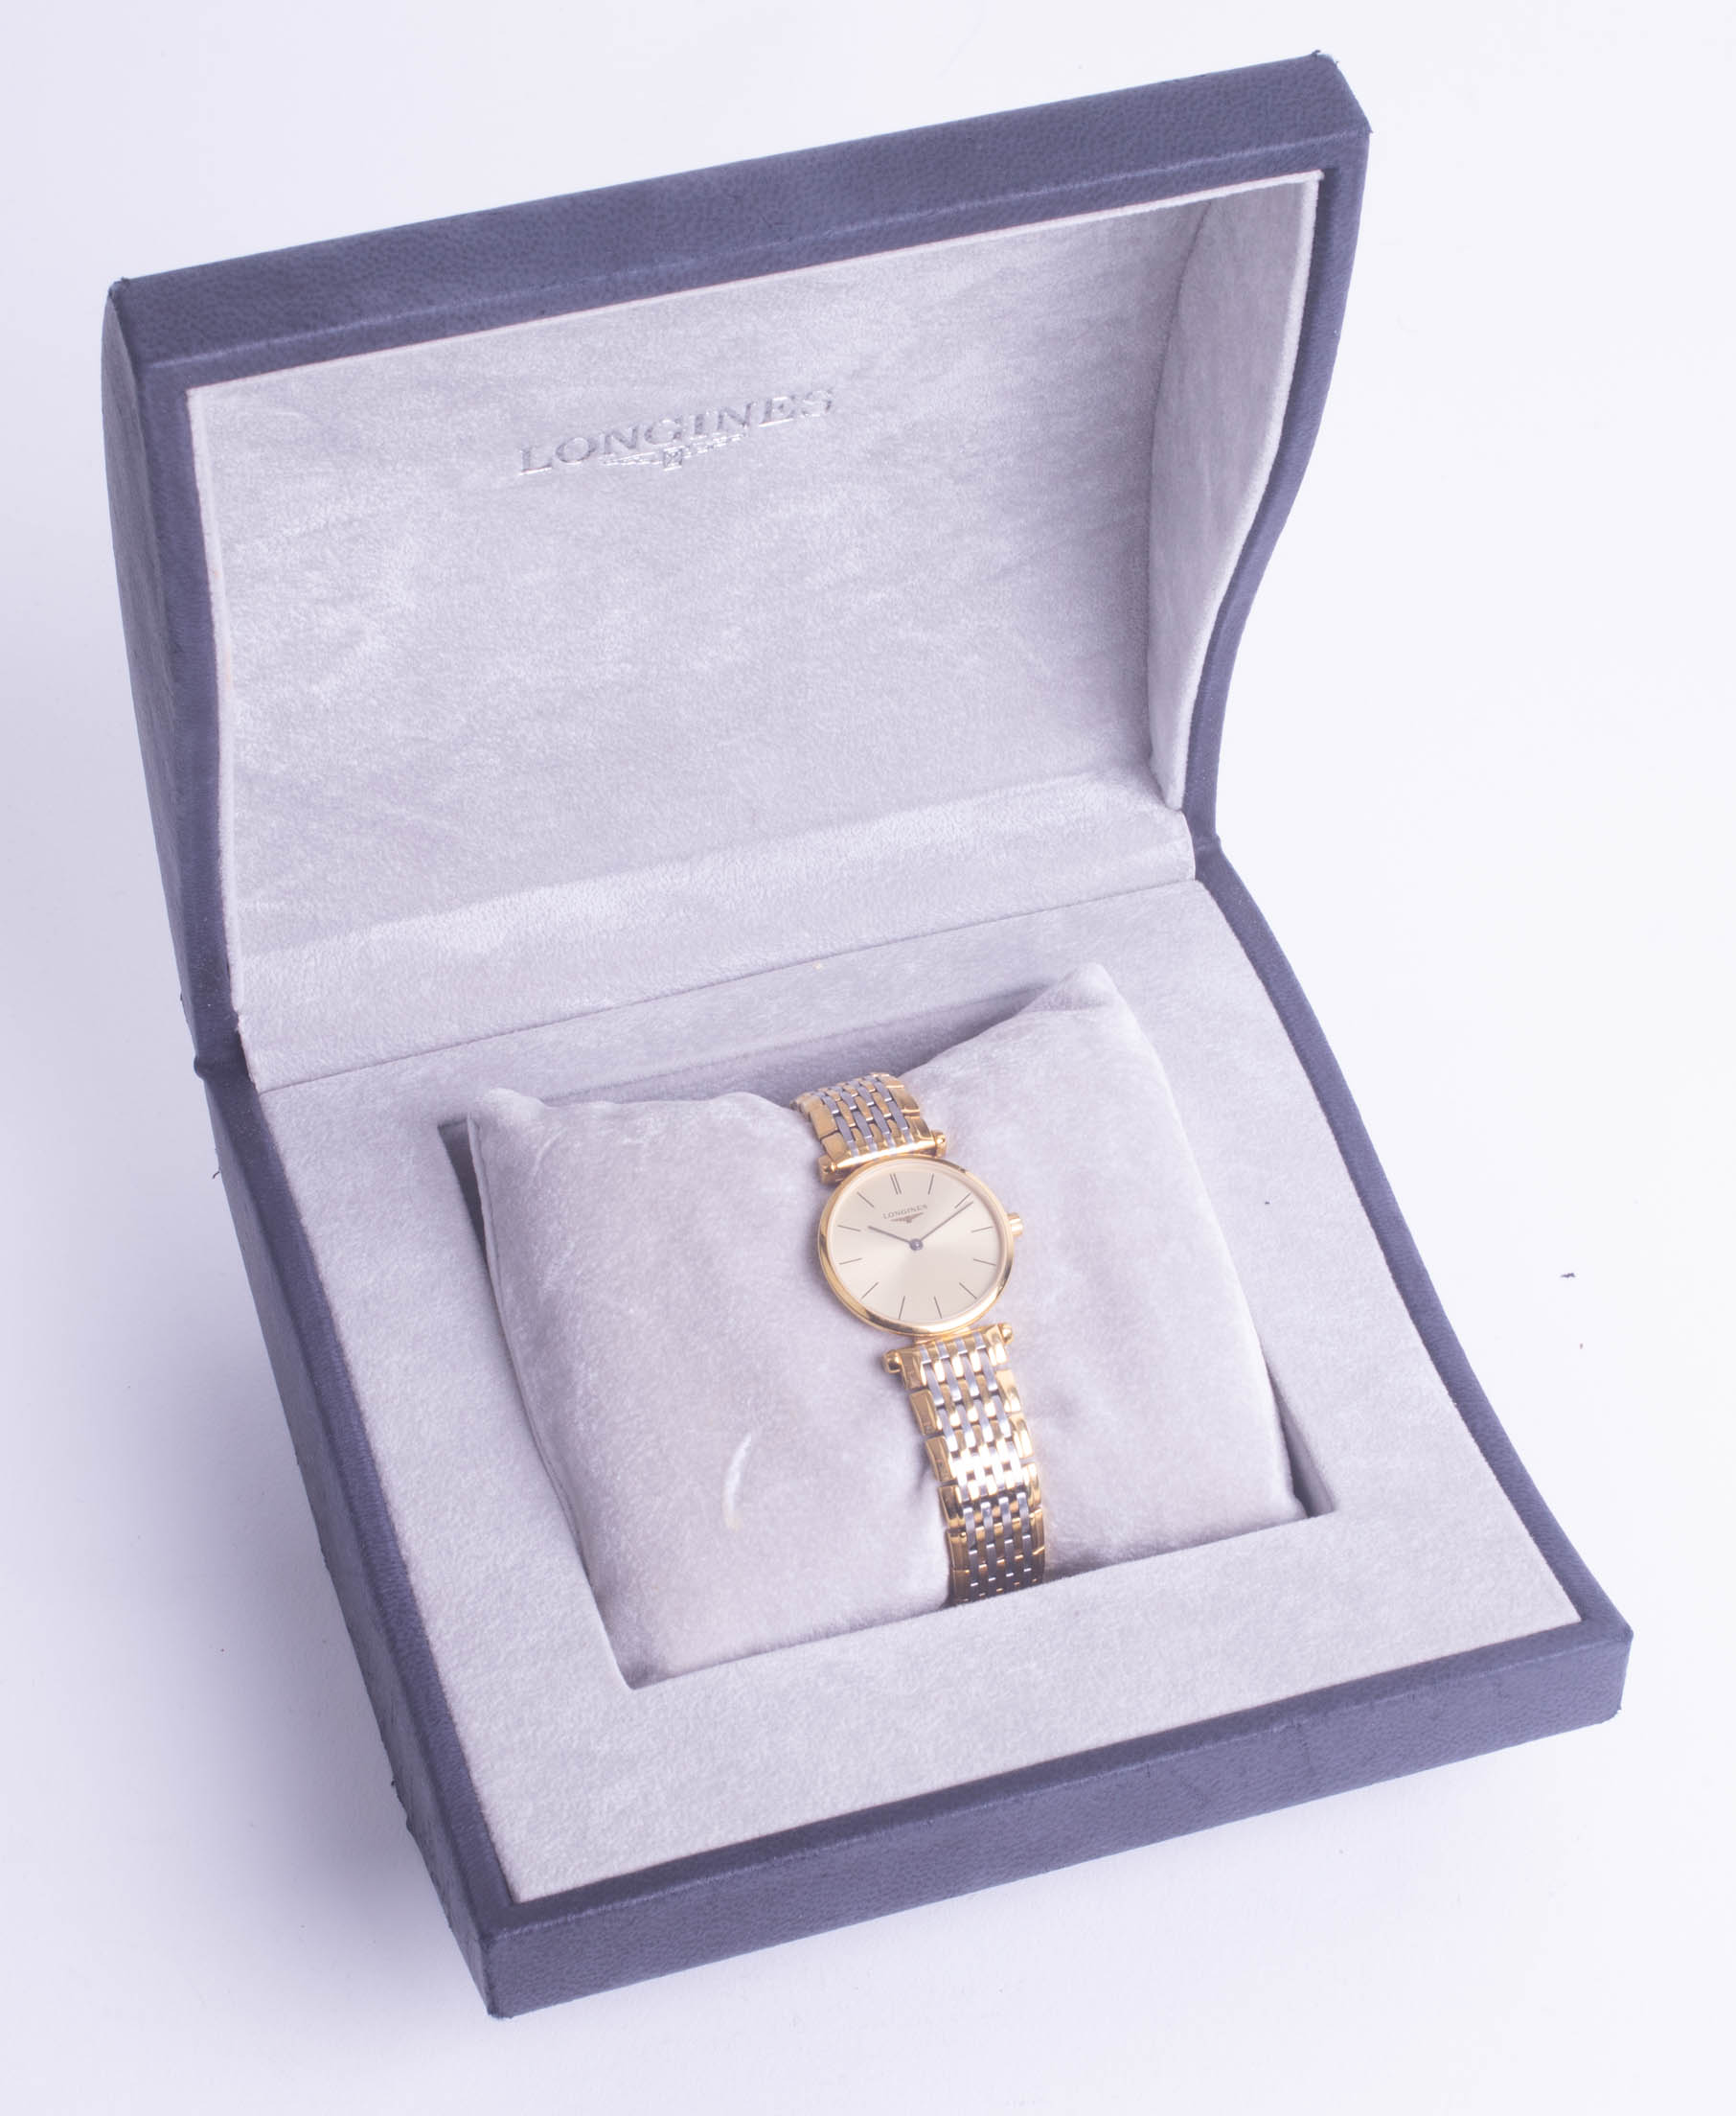 Longines, Le Grande Classic, a ladies classic wristwatch, boxed with extra links, back plate - Image 2 of 2